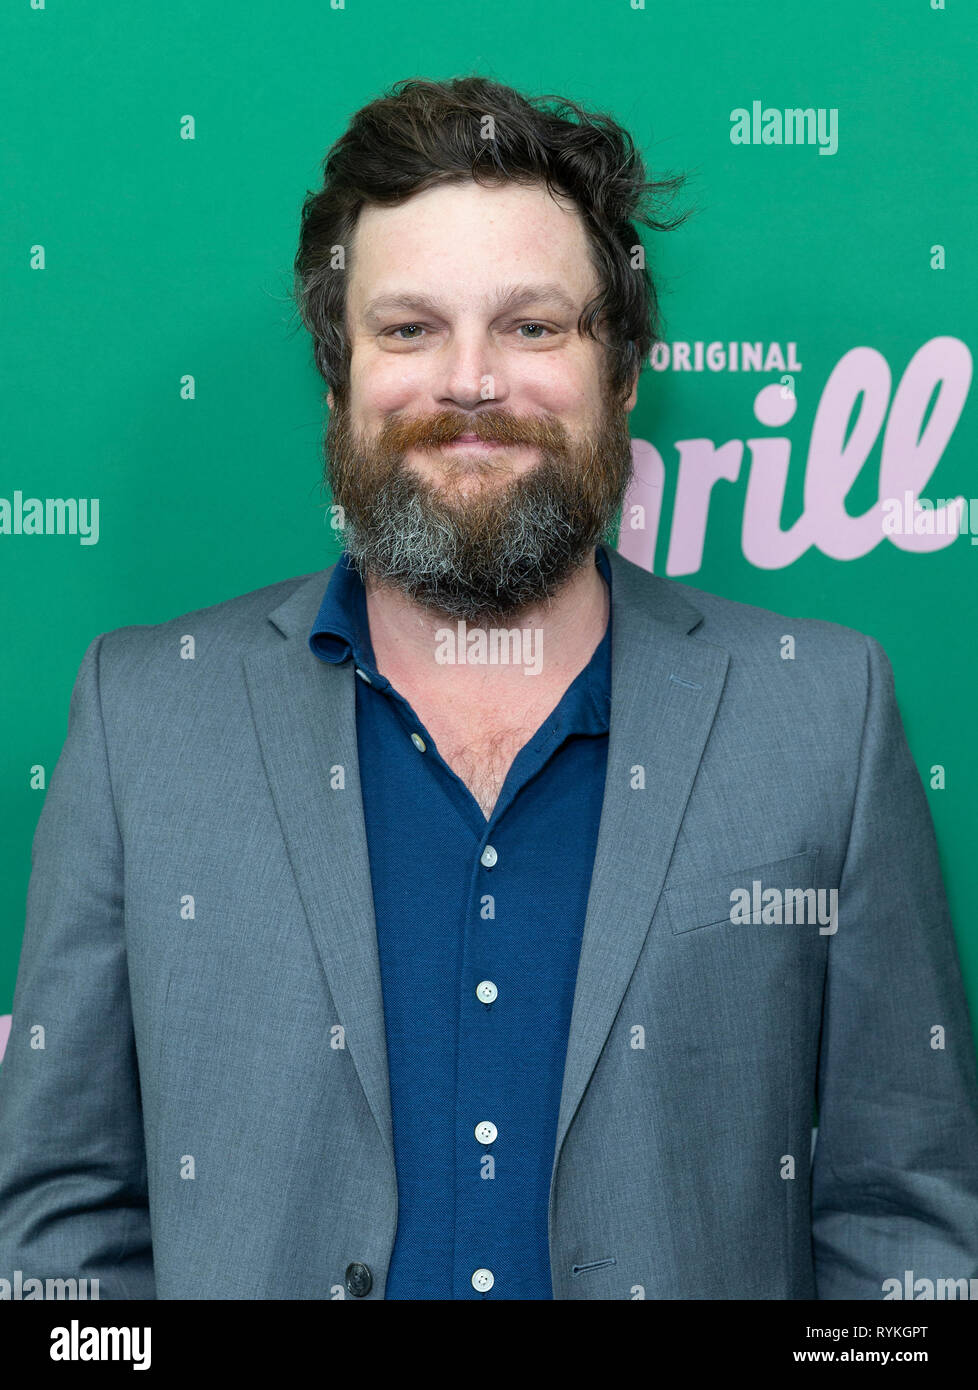 Luka Jones attends New York Hulu Shrill premiere screening at Walter Reade Theater of Lincoln Center (Photo by Lev Radin / Pacific Press) Stock Photo